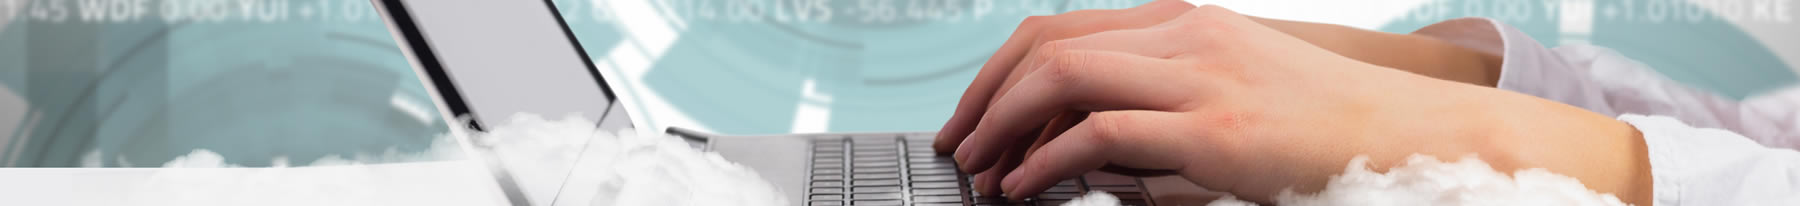 woman's hands typing on laptop